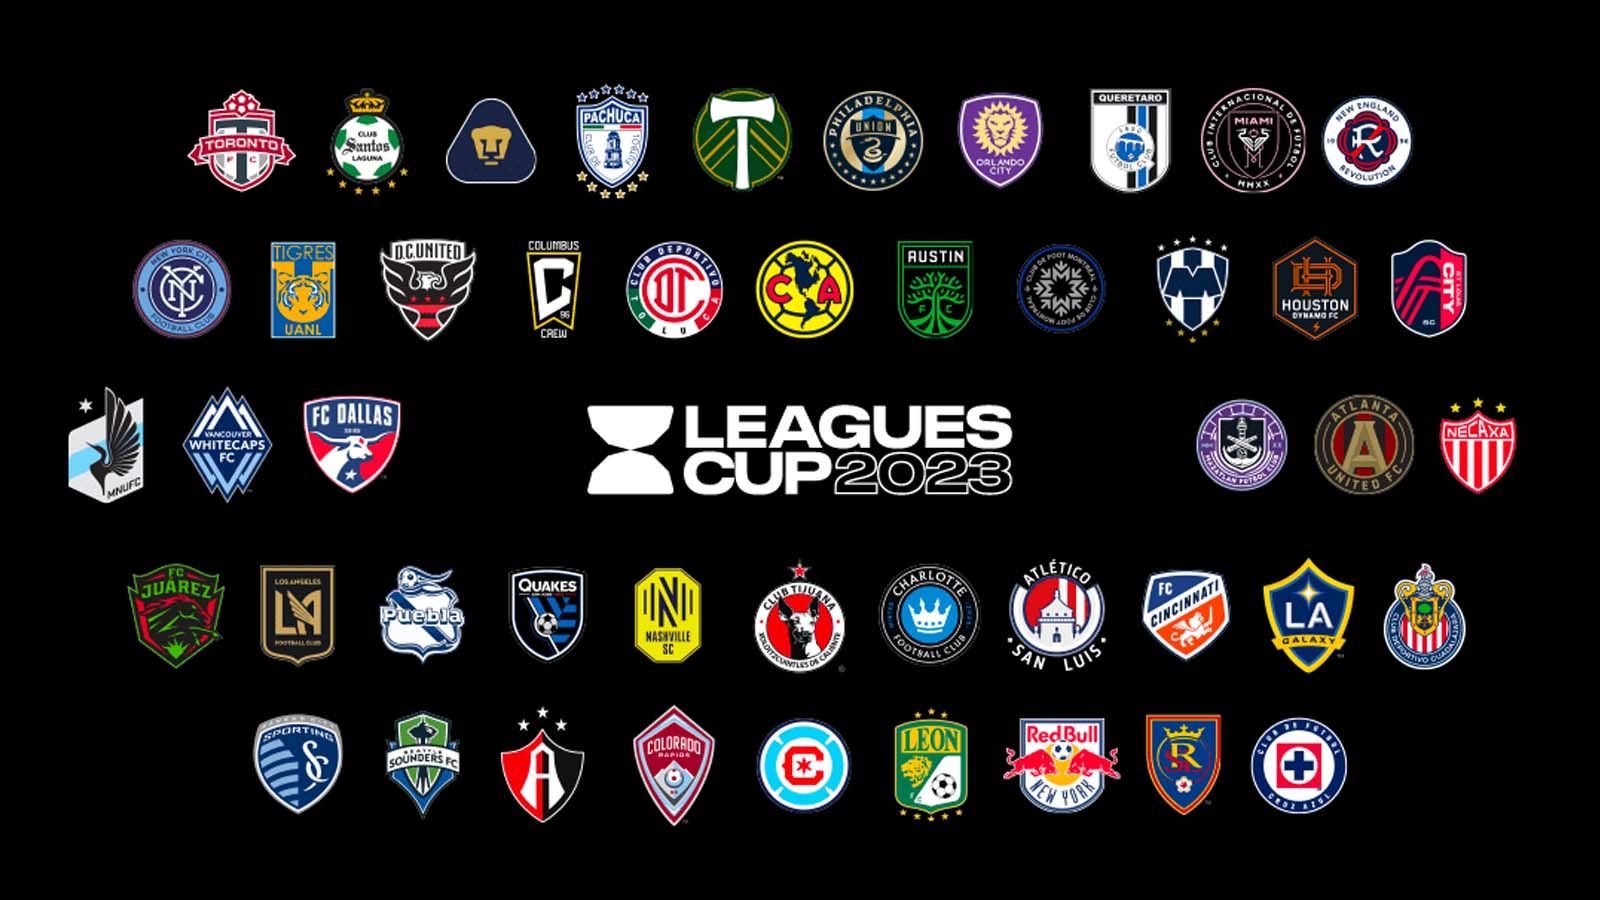 MLS, Liga MX Expanding Leagues Cup to 47 Teams in 2023 – SportsTravel